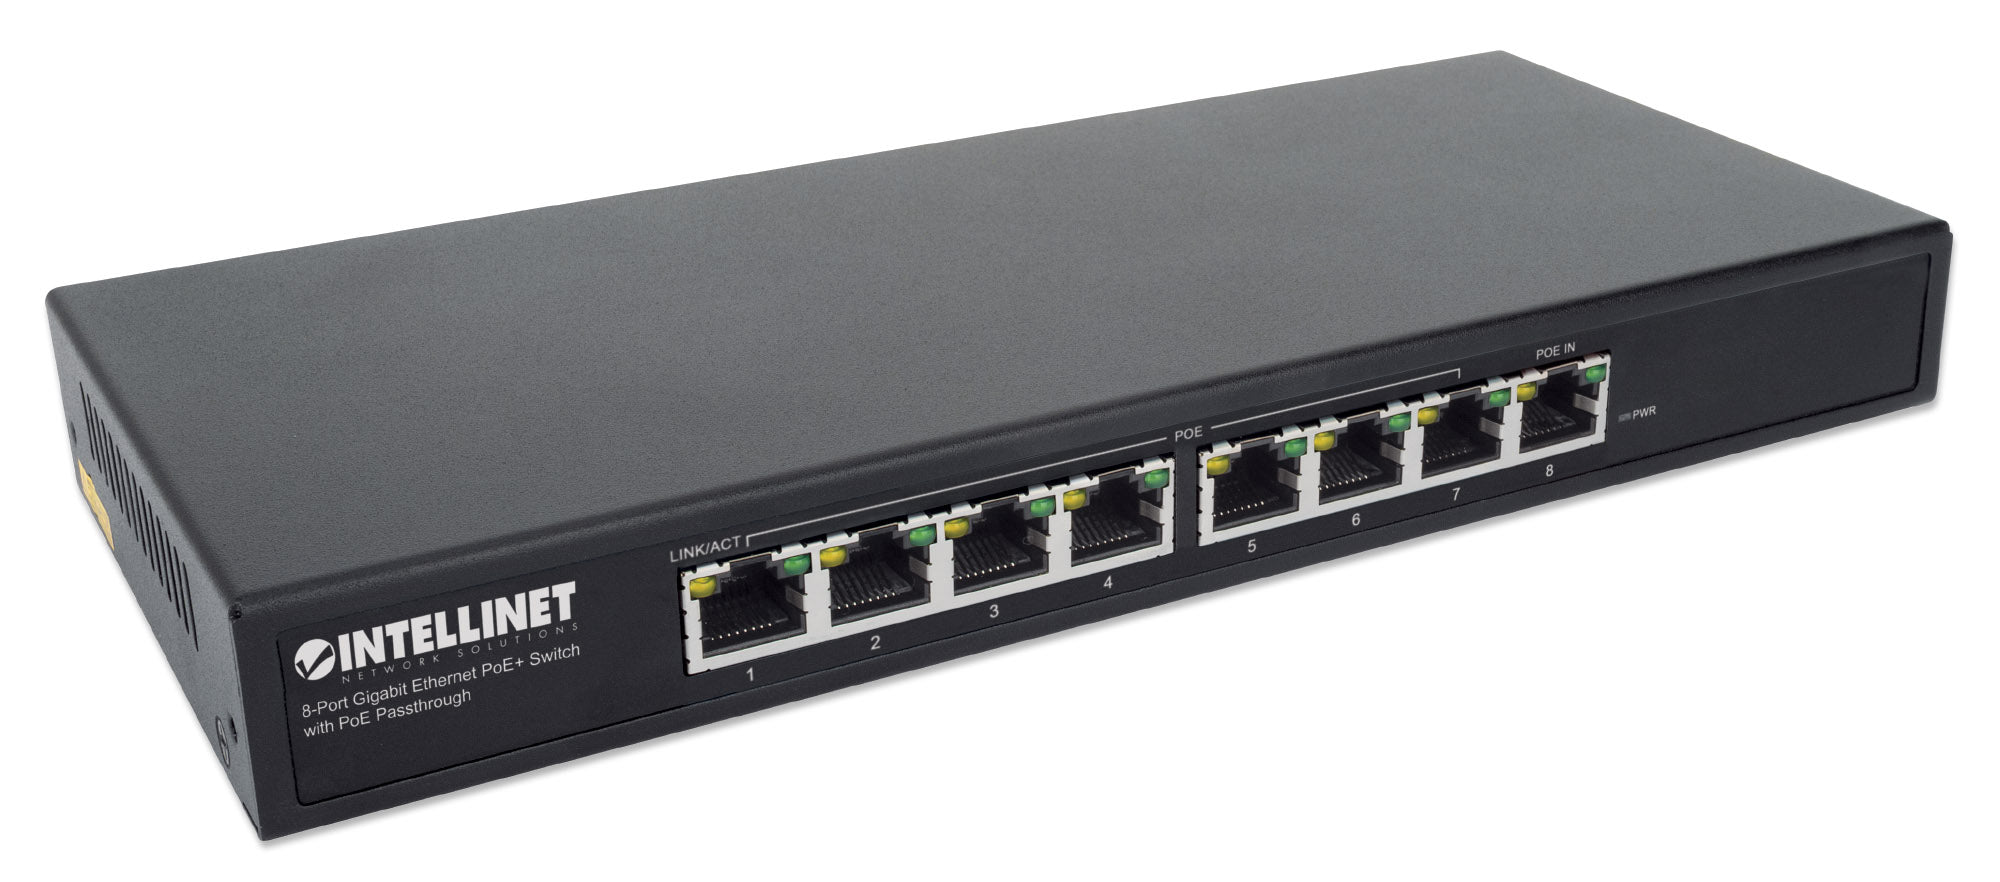 PoE-Powered 5-Port GbE Switch w/ PoE Passthrough